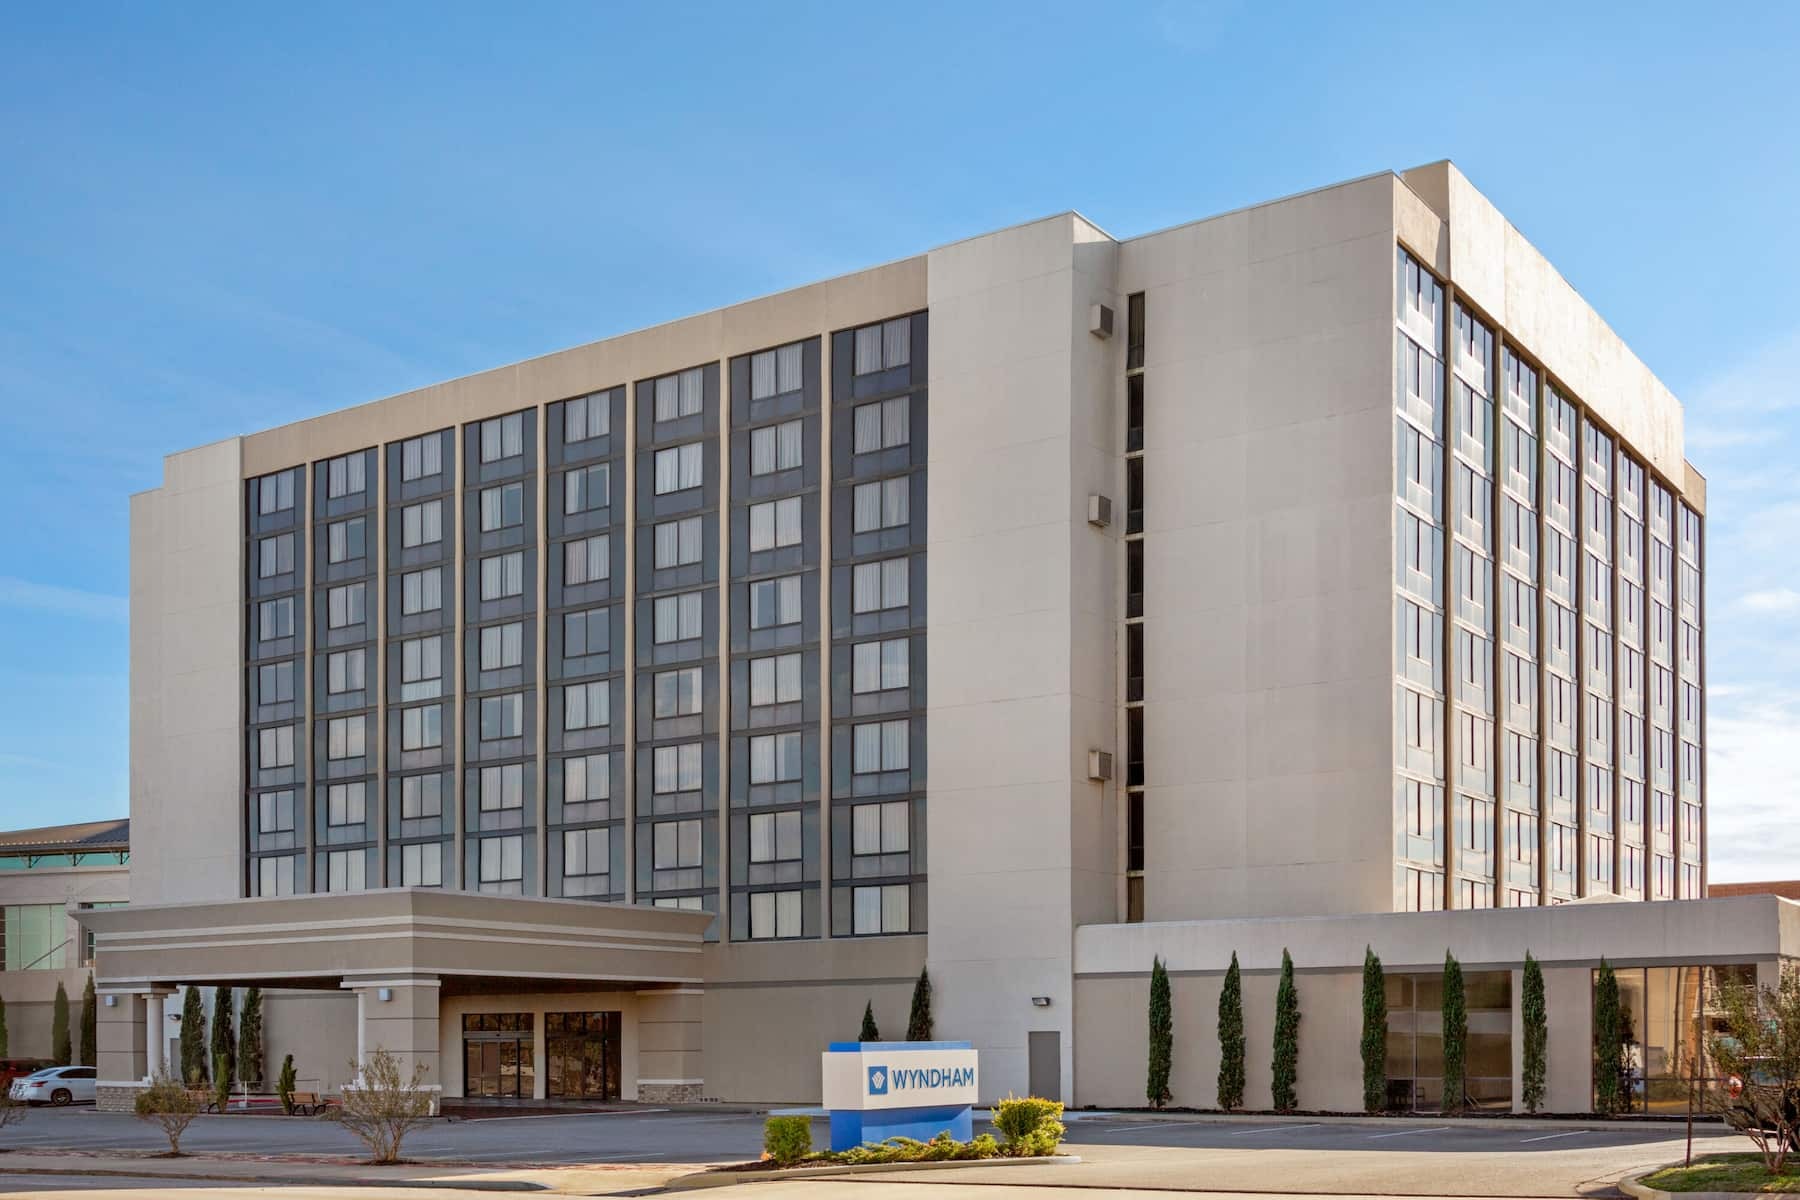 Photo of Wyndham Fort Smith City Center, Fort Smith, AR